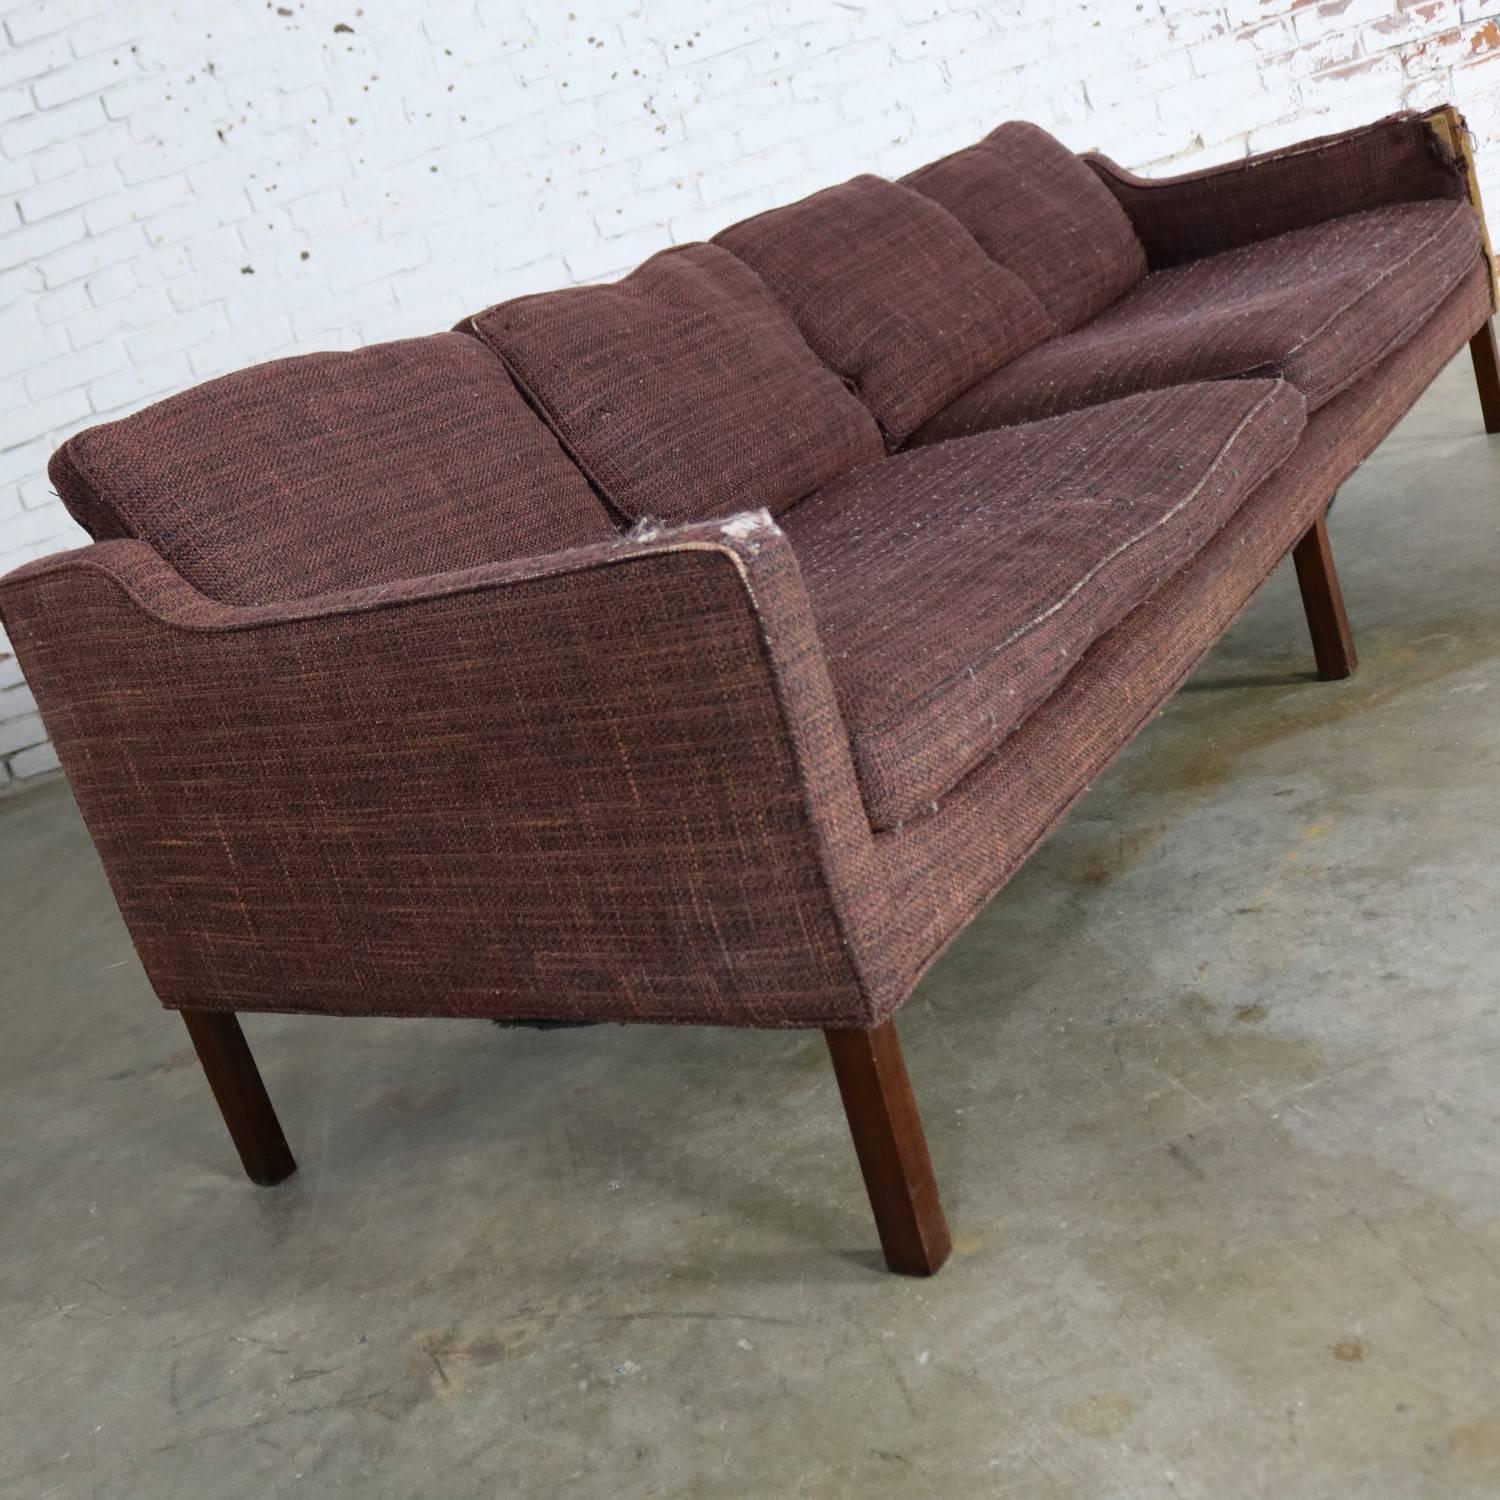 Fabric Thayer Coggin Four-Seat Sofa by Milo Baughman Frame Only